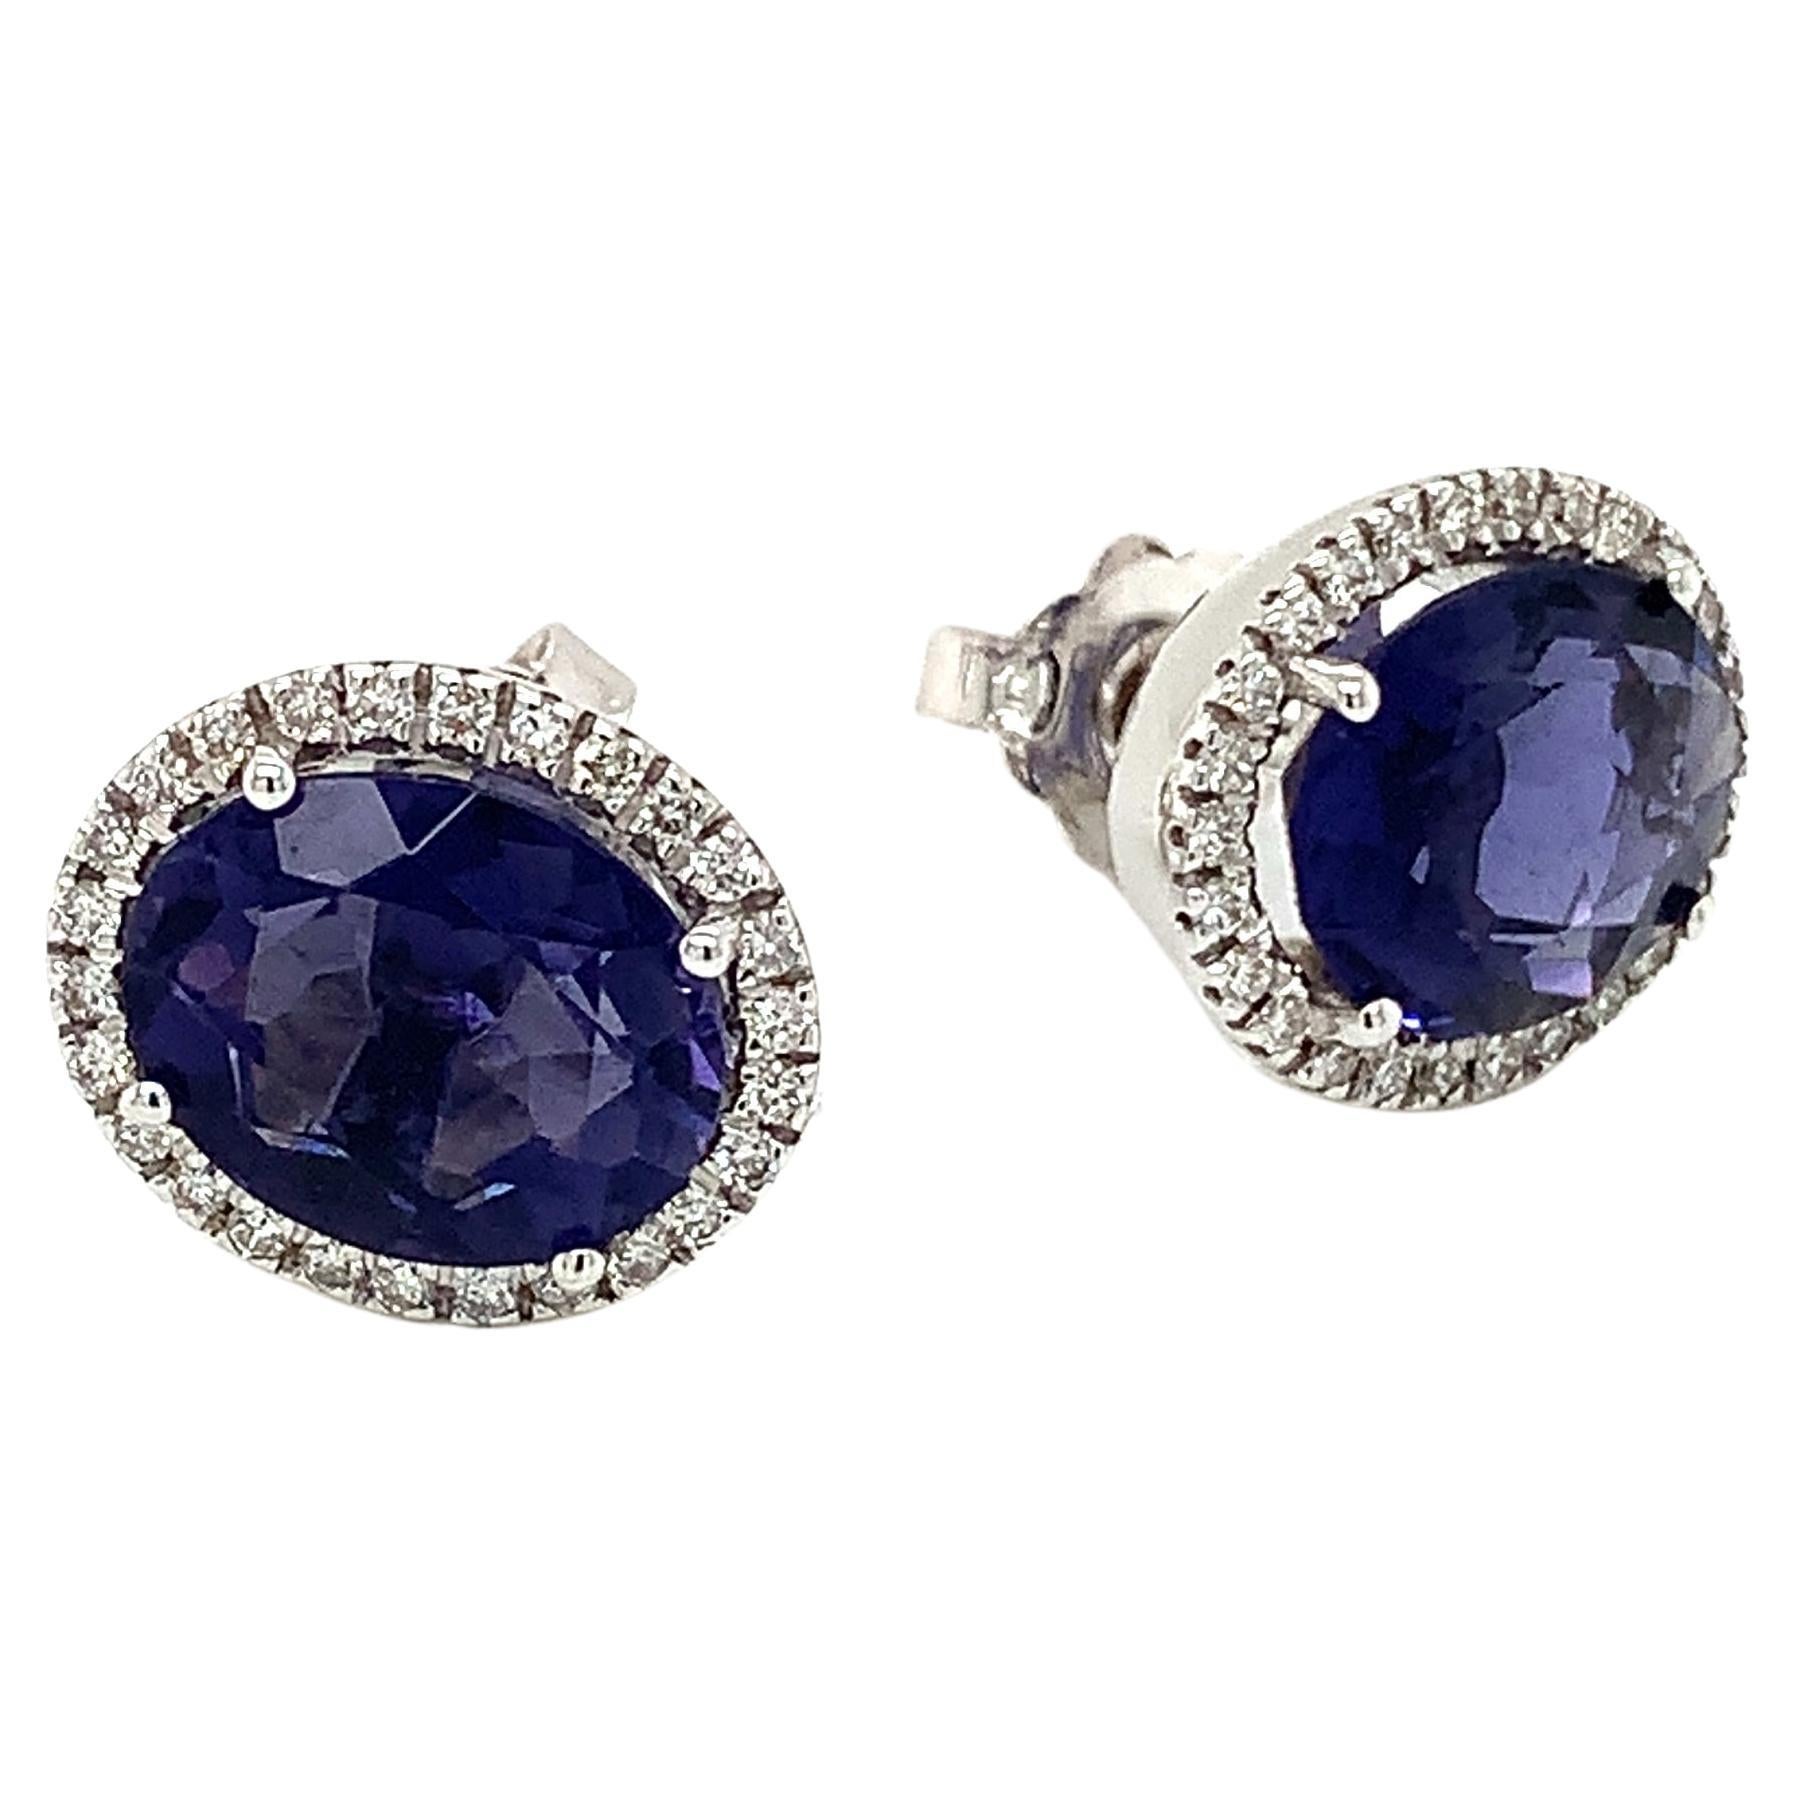 18 Kt White Gold Oval Shape Stud Earrings in Iolite and Diamonds by Garavelli   For Sale